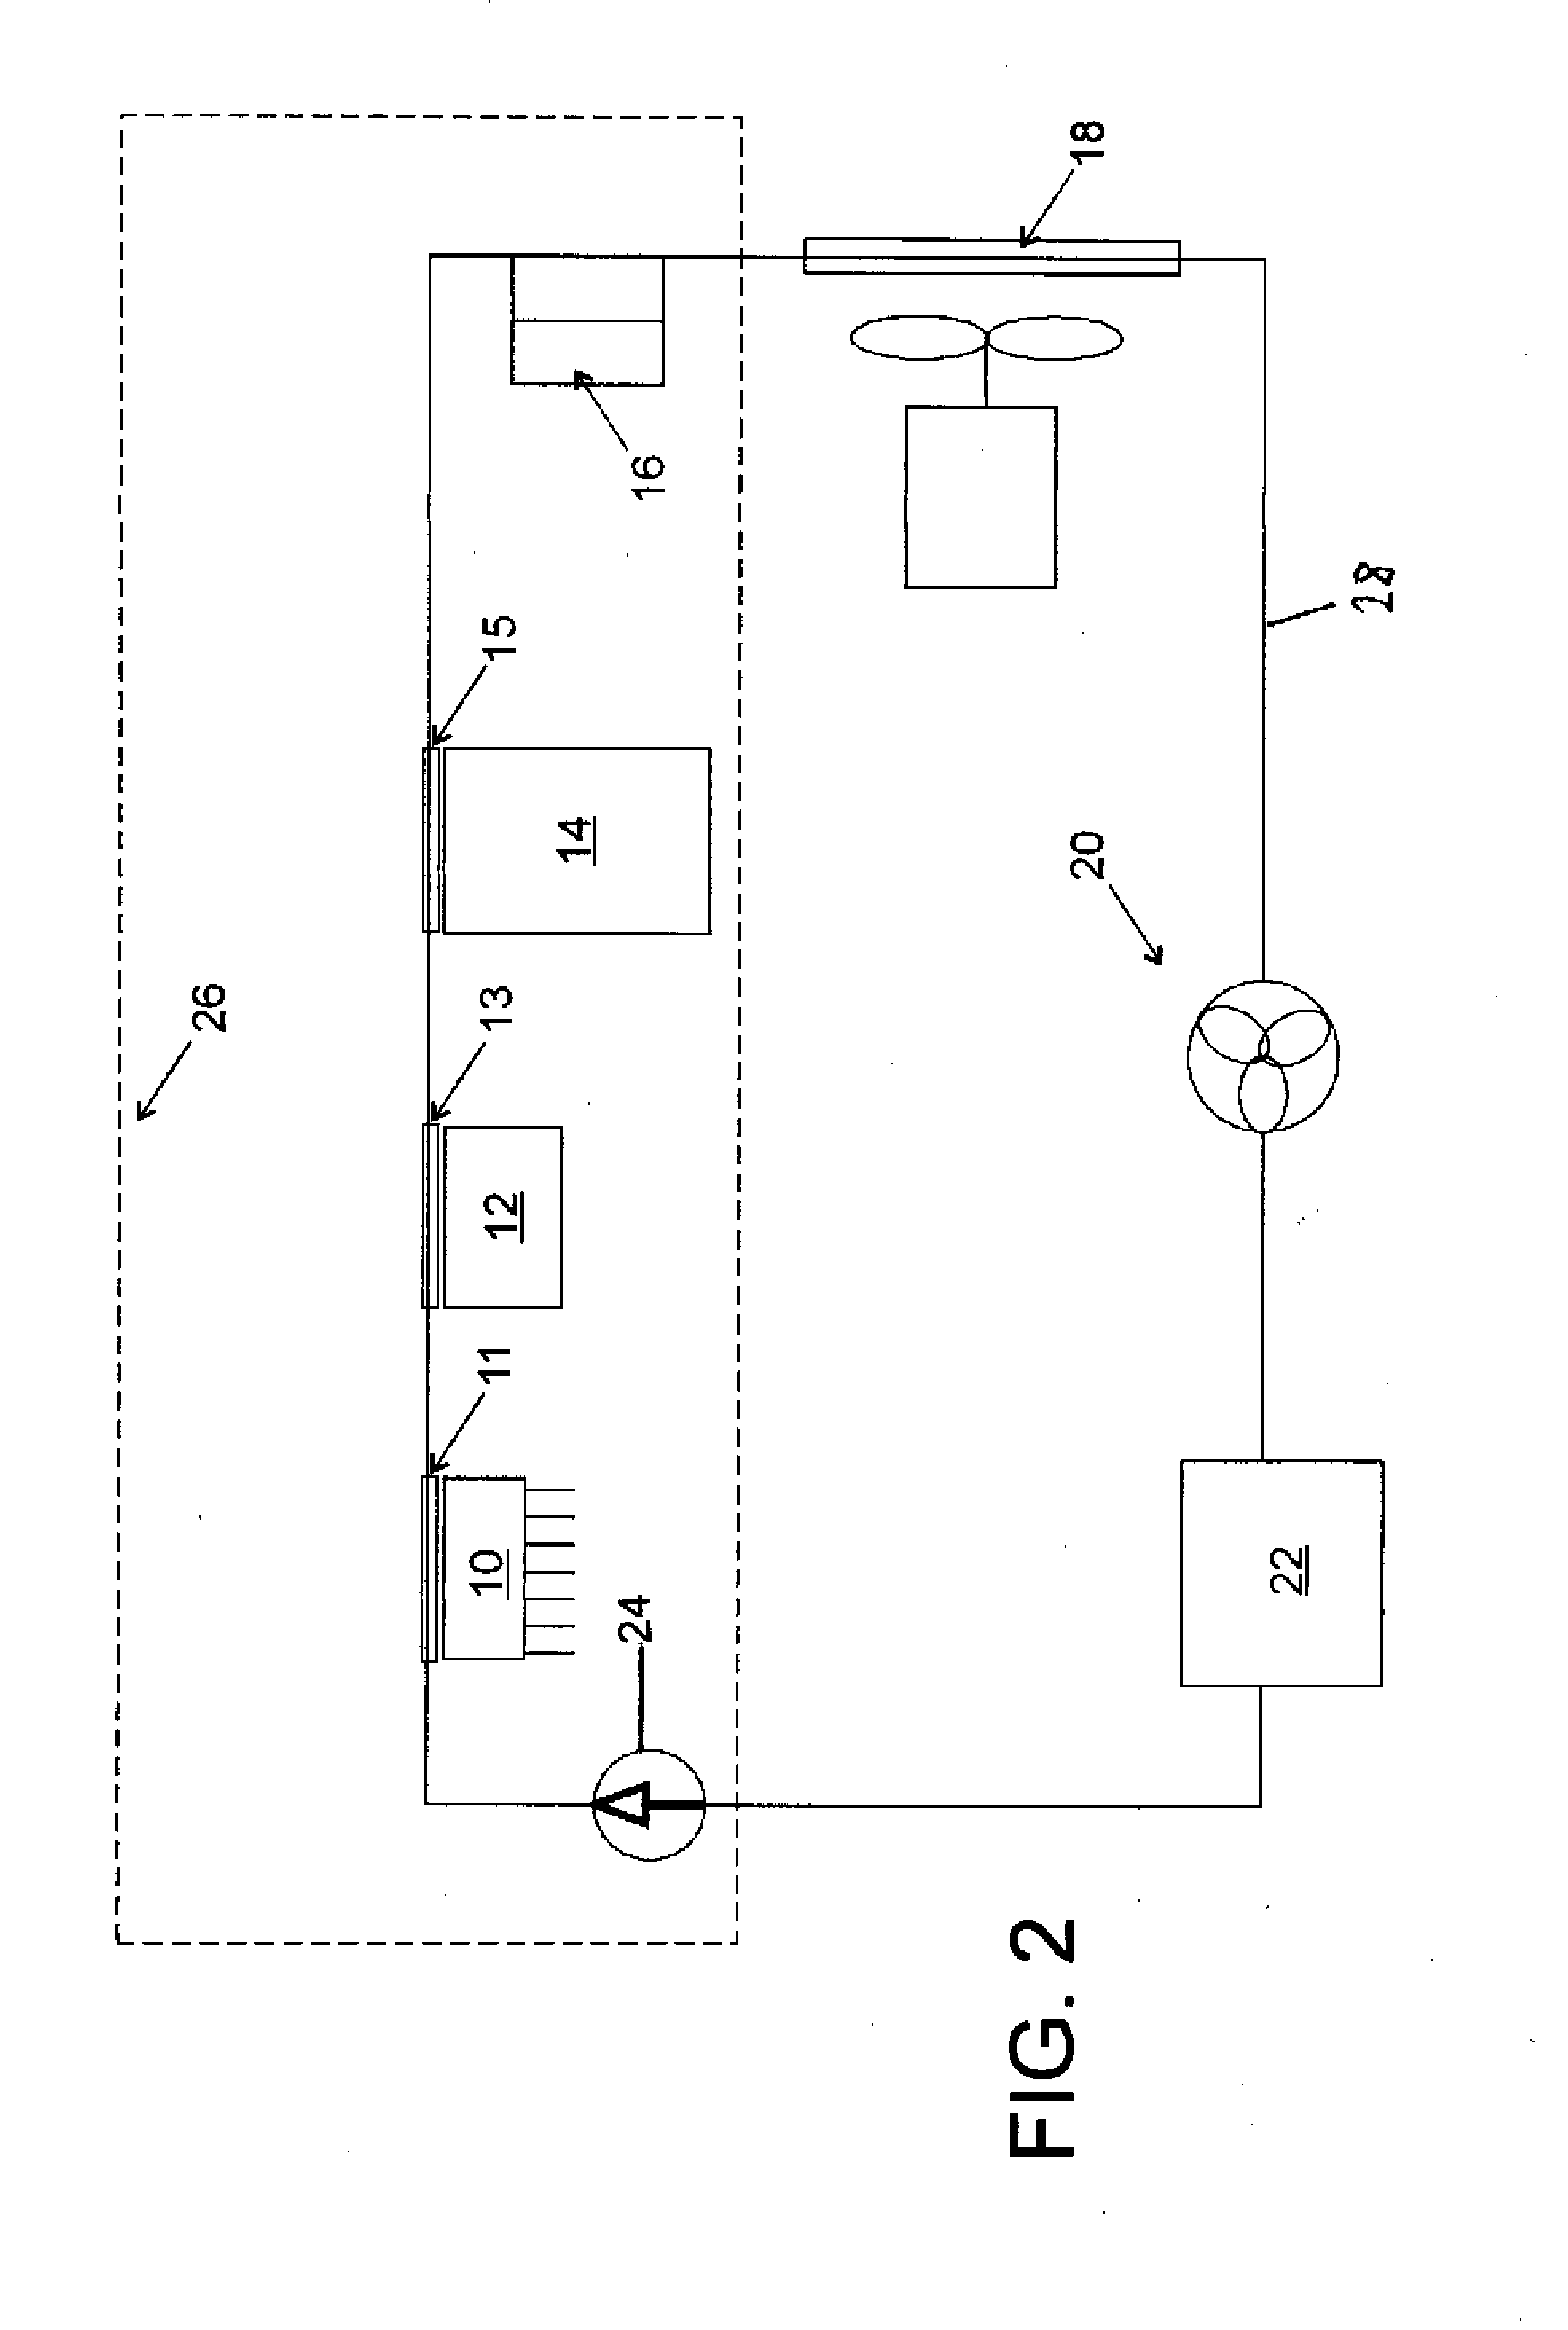 Water-cooled control device for a plastics processing machine